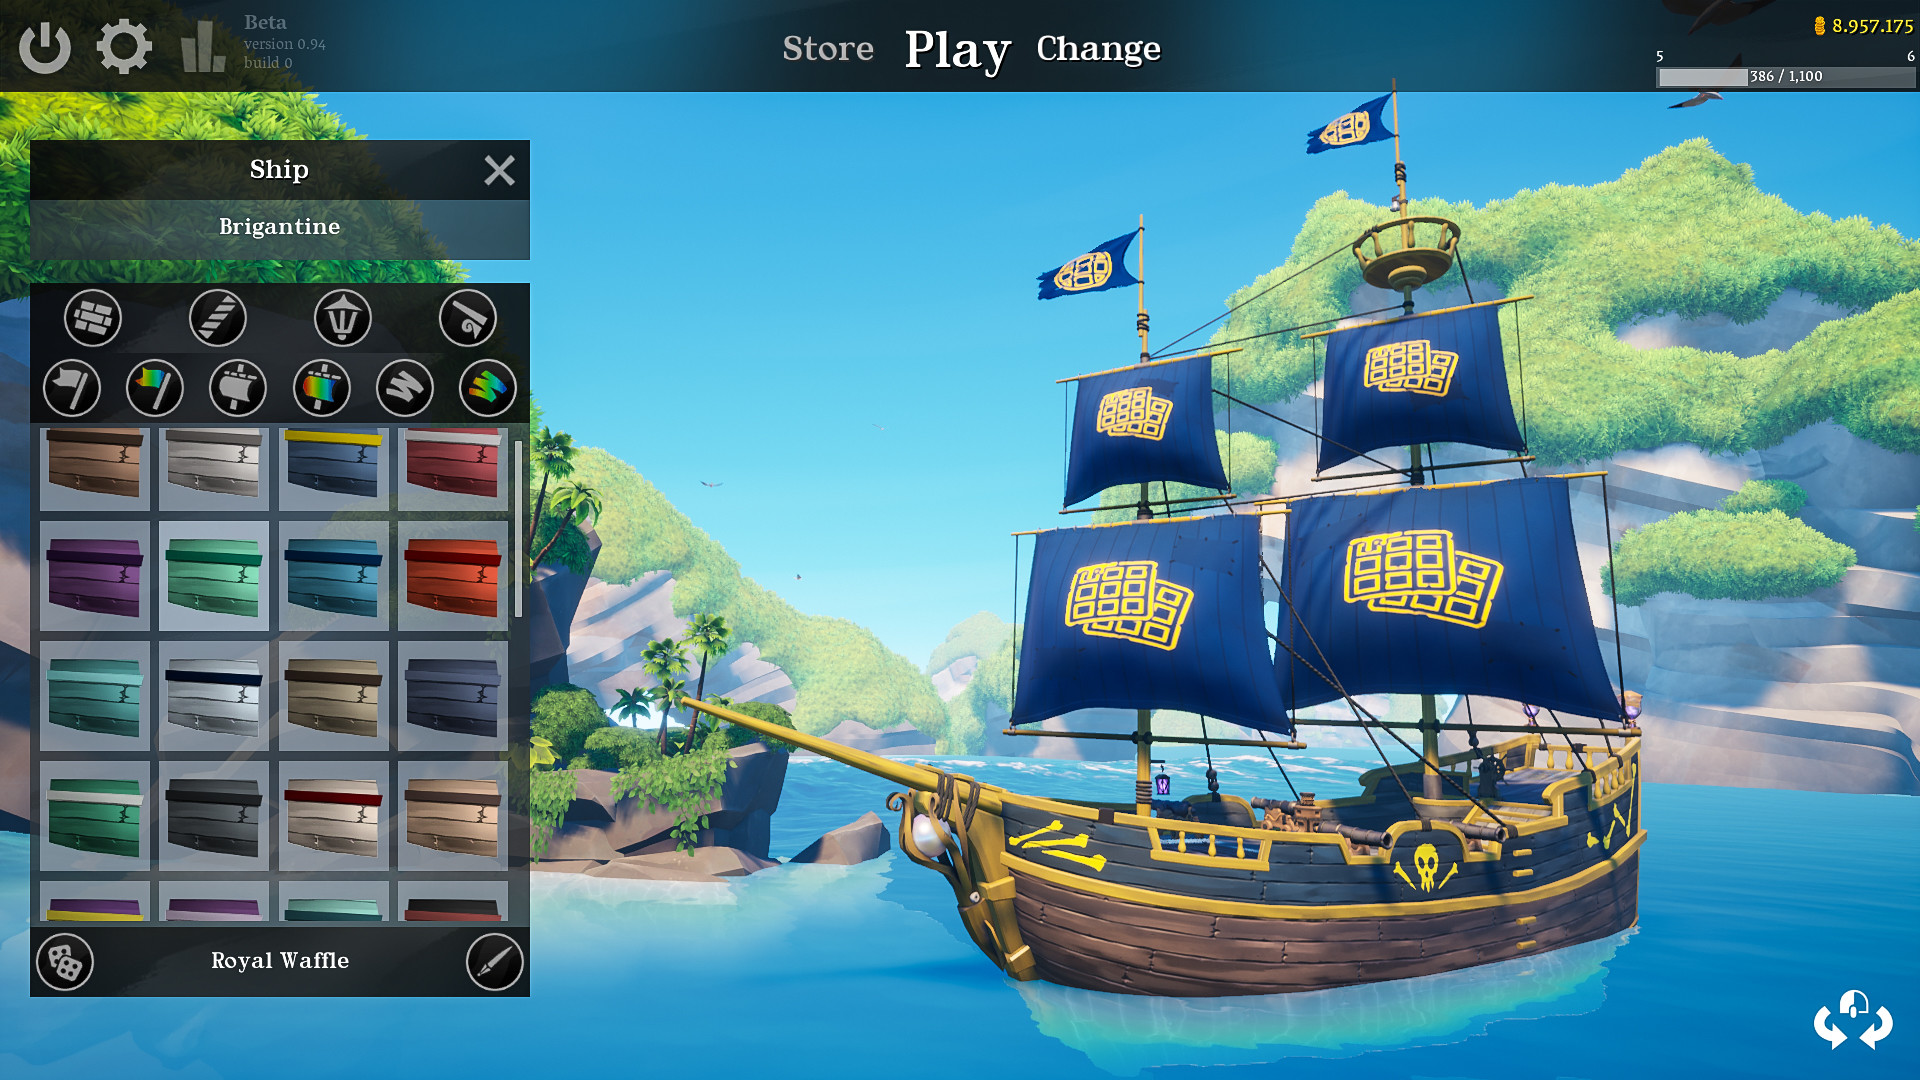 Blazing Sails Pirate Battle Royale On Steam - ship it how to build boats roblox gaming adventures